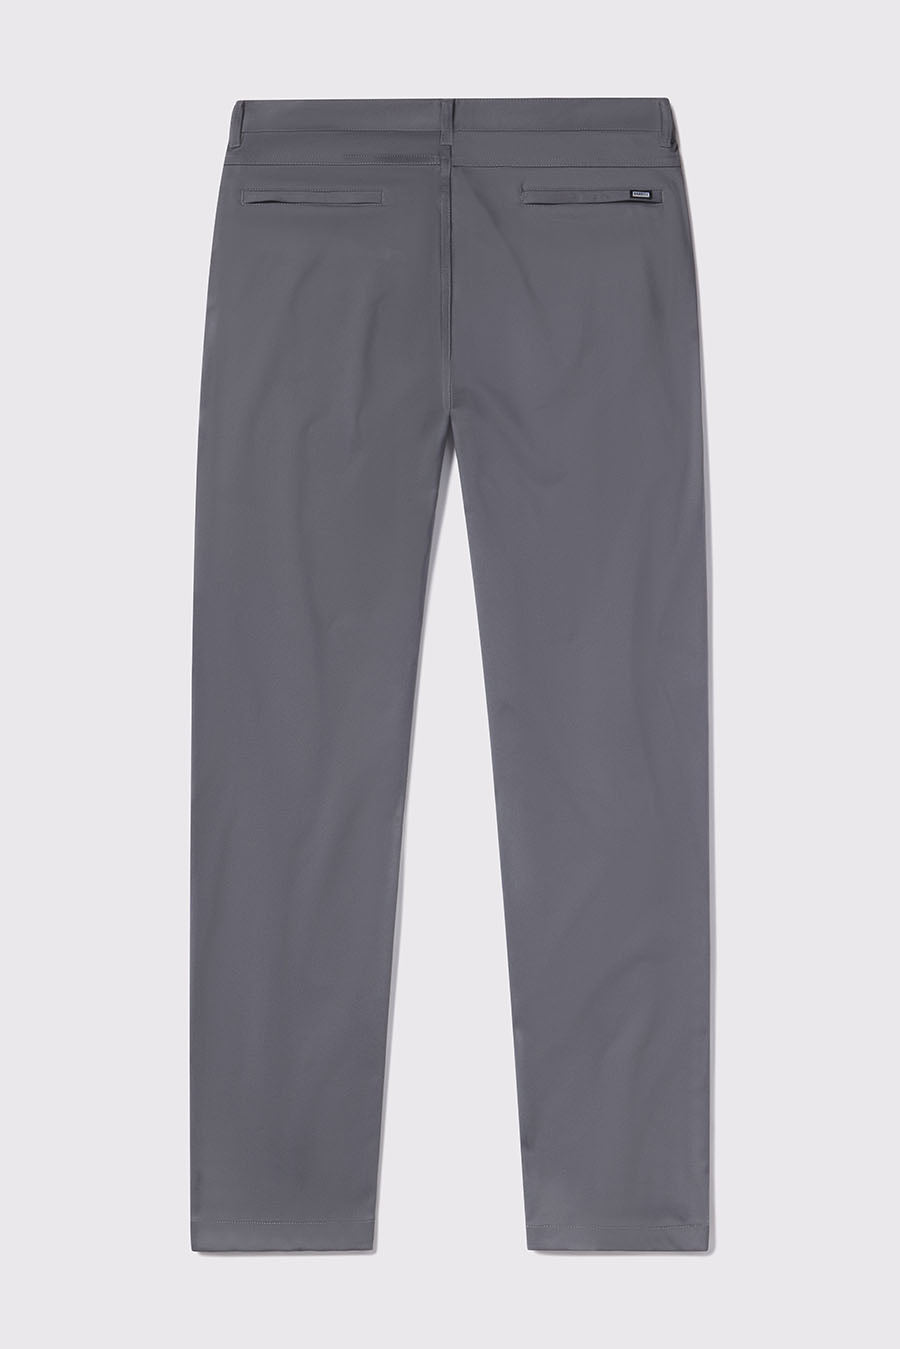 Anything Dress Pant - Slate - photo from back flat lay #color_slate